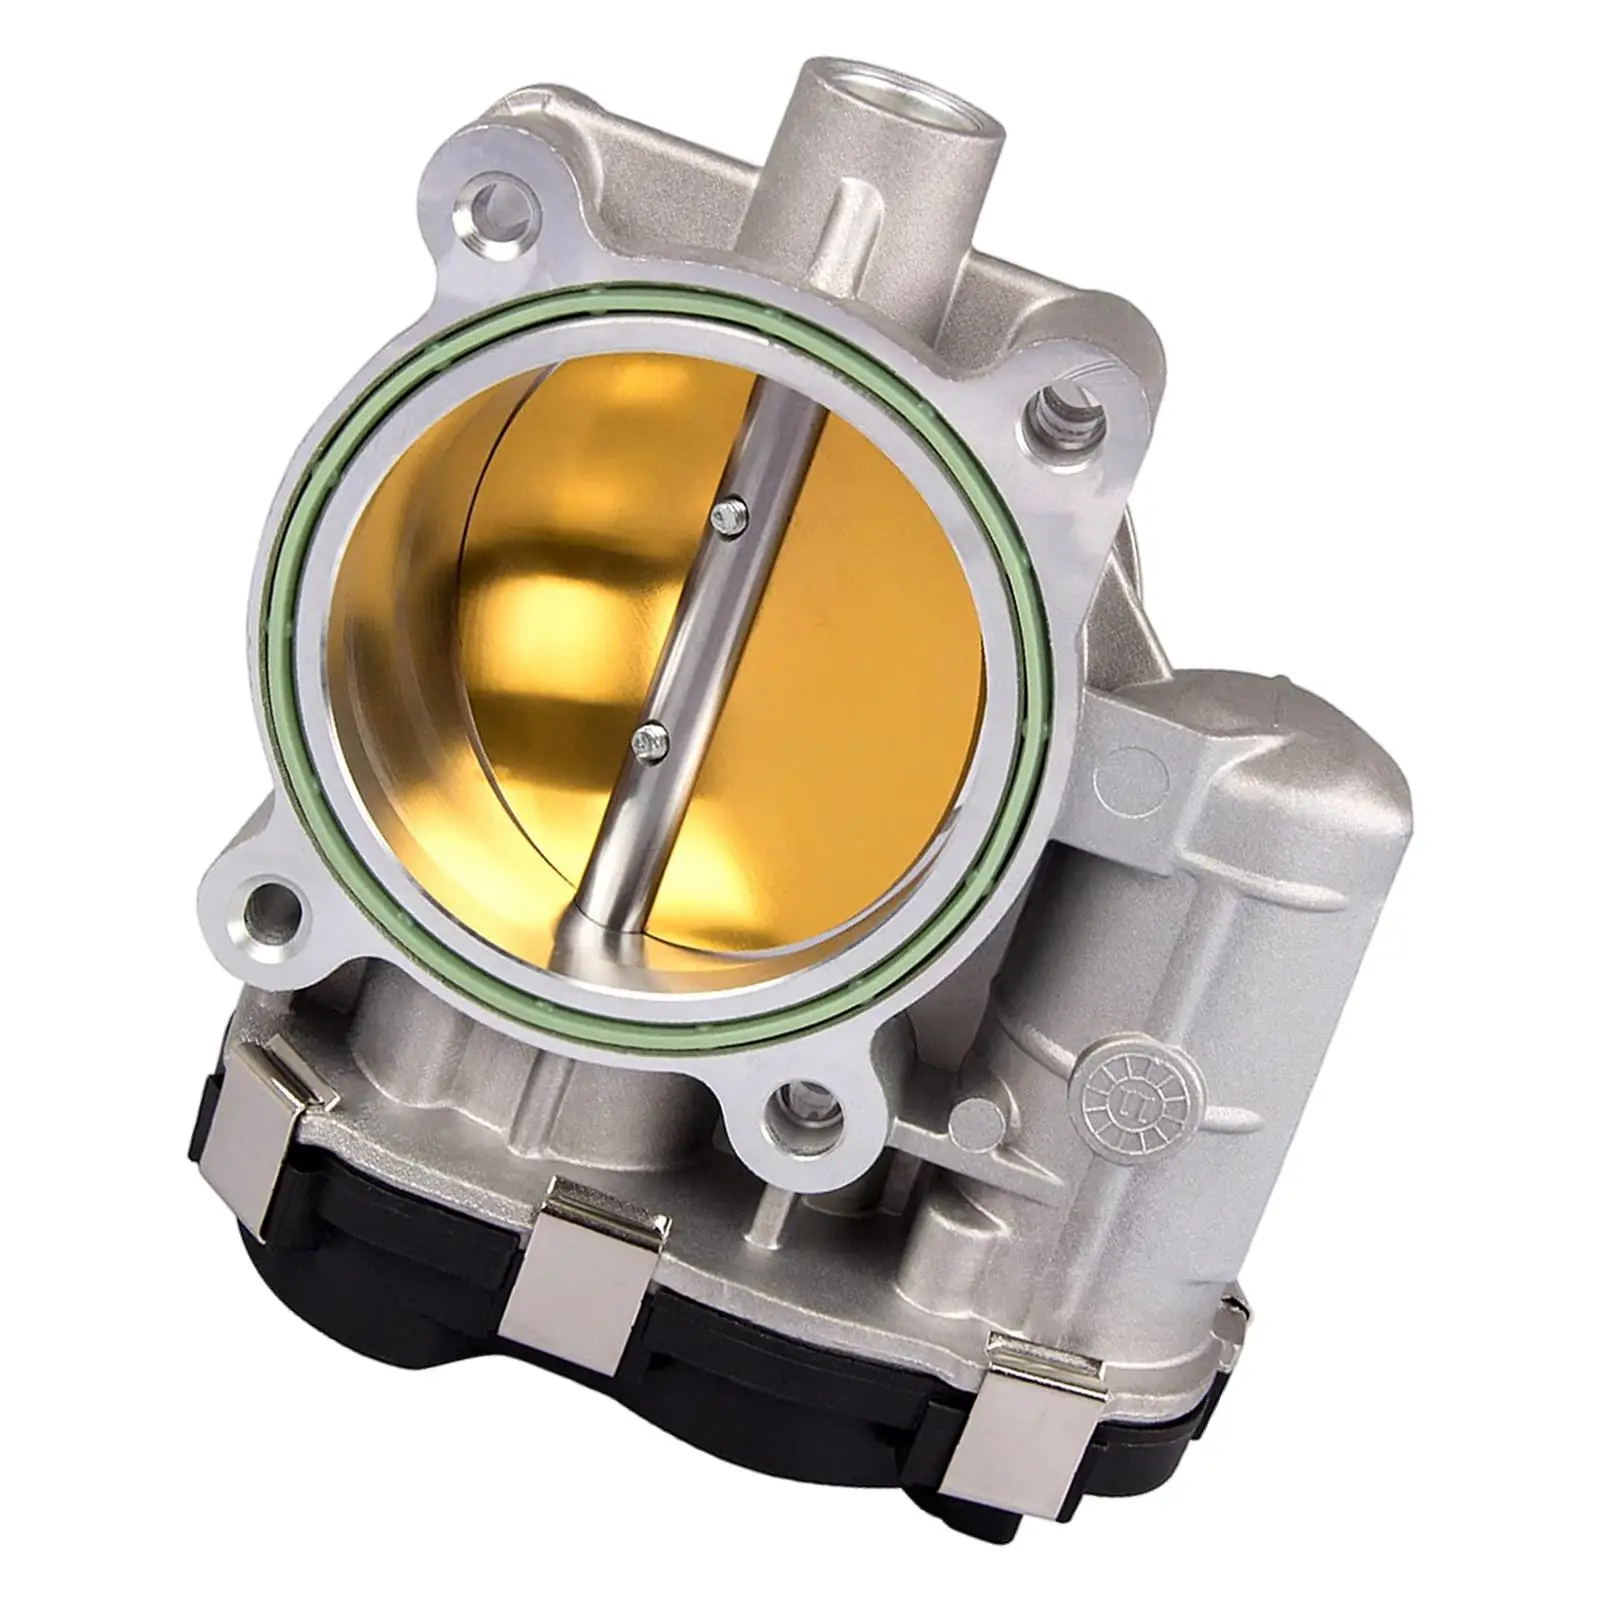 Fuel Throttle Body/ Replace 977-008 67-3002 S20009 2173108 Assembly/ 217-3108 Etb00172298 Tbr00 for   Vue Relay